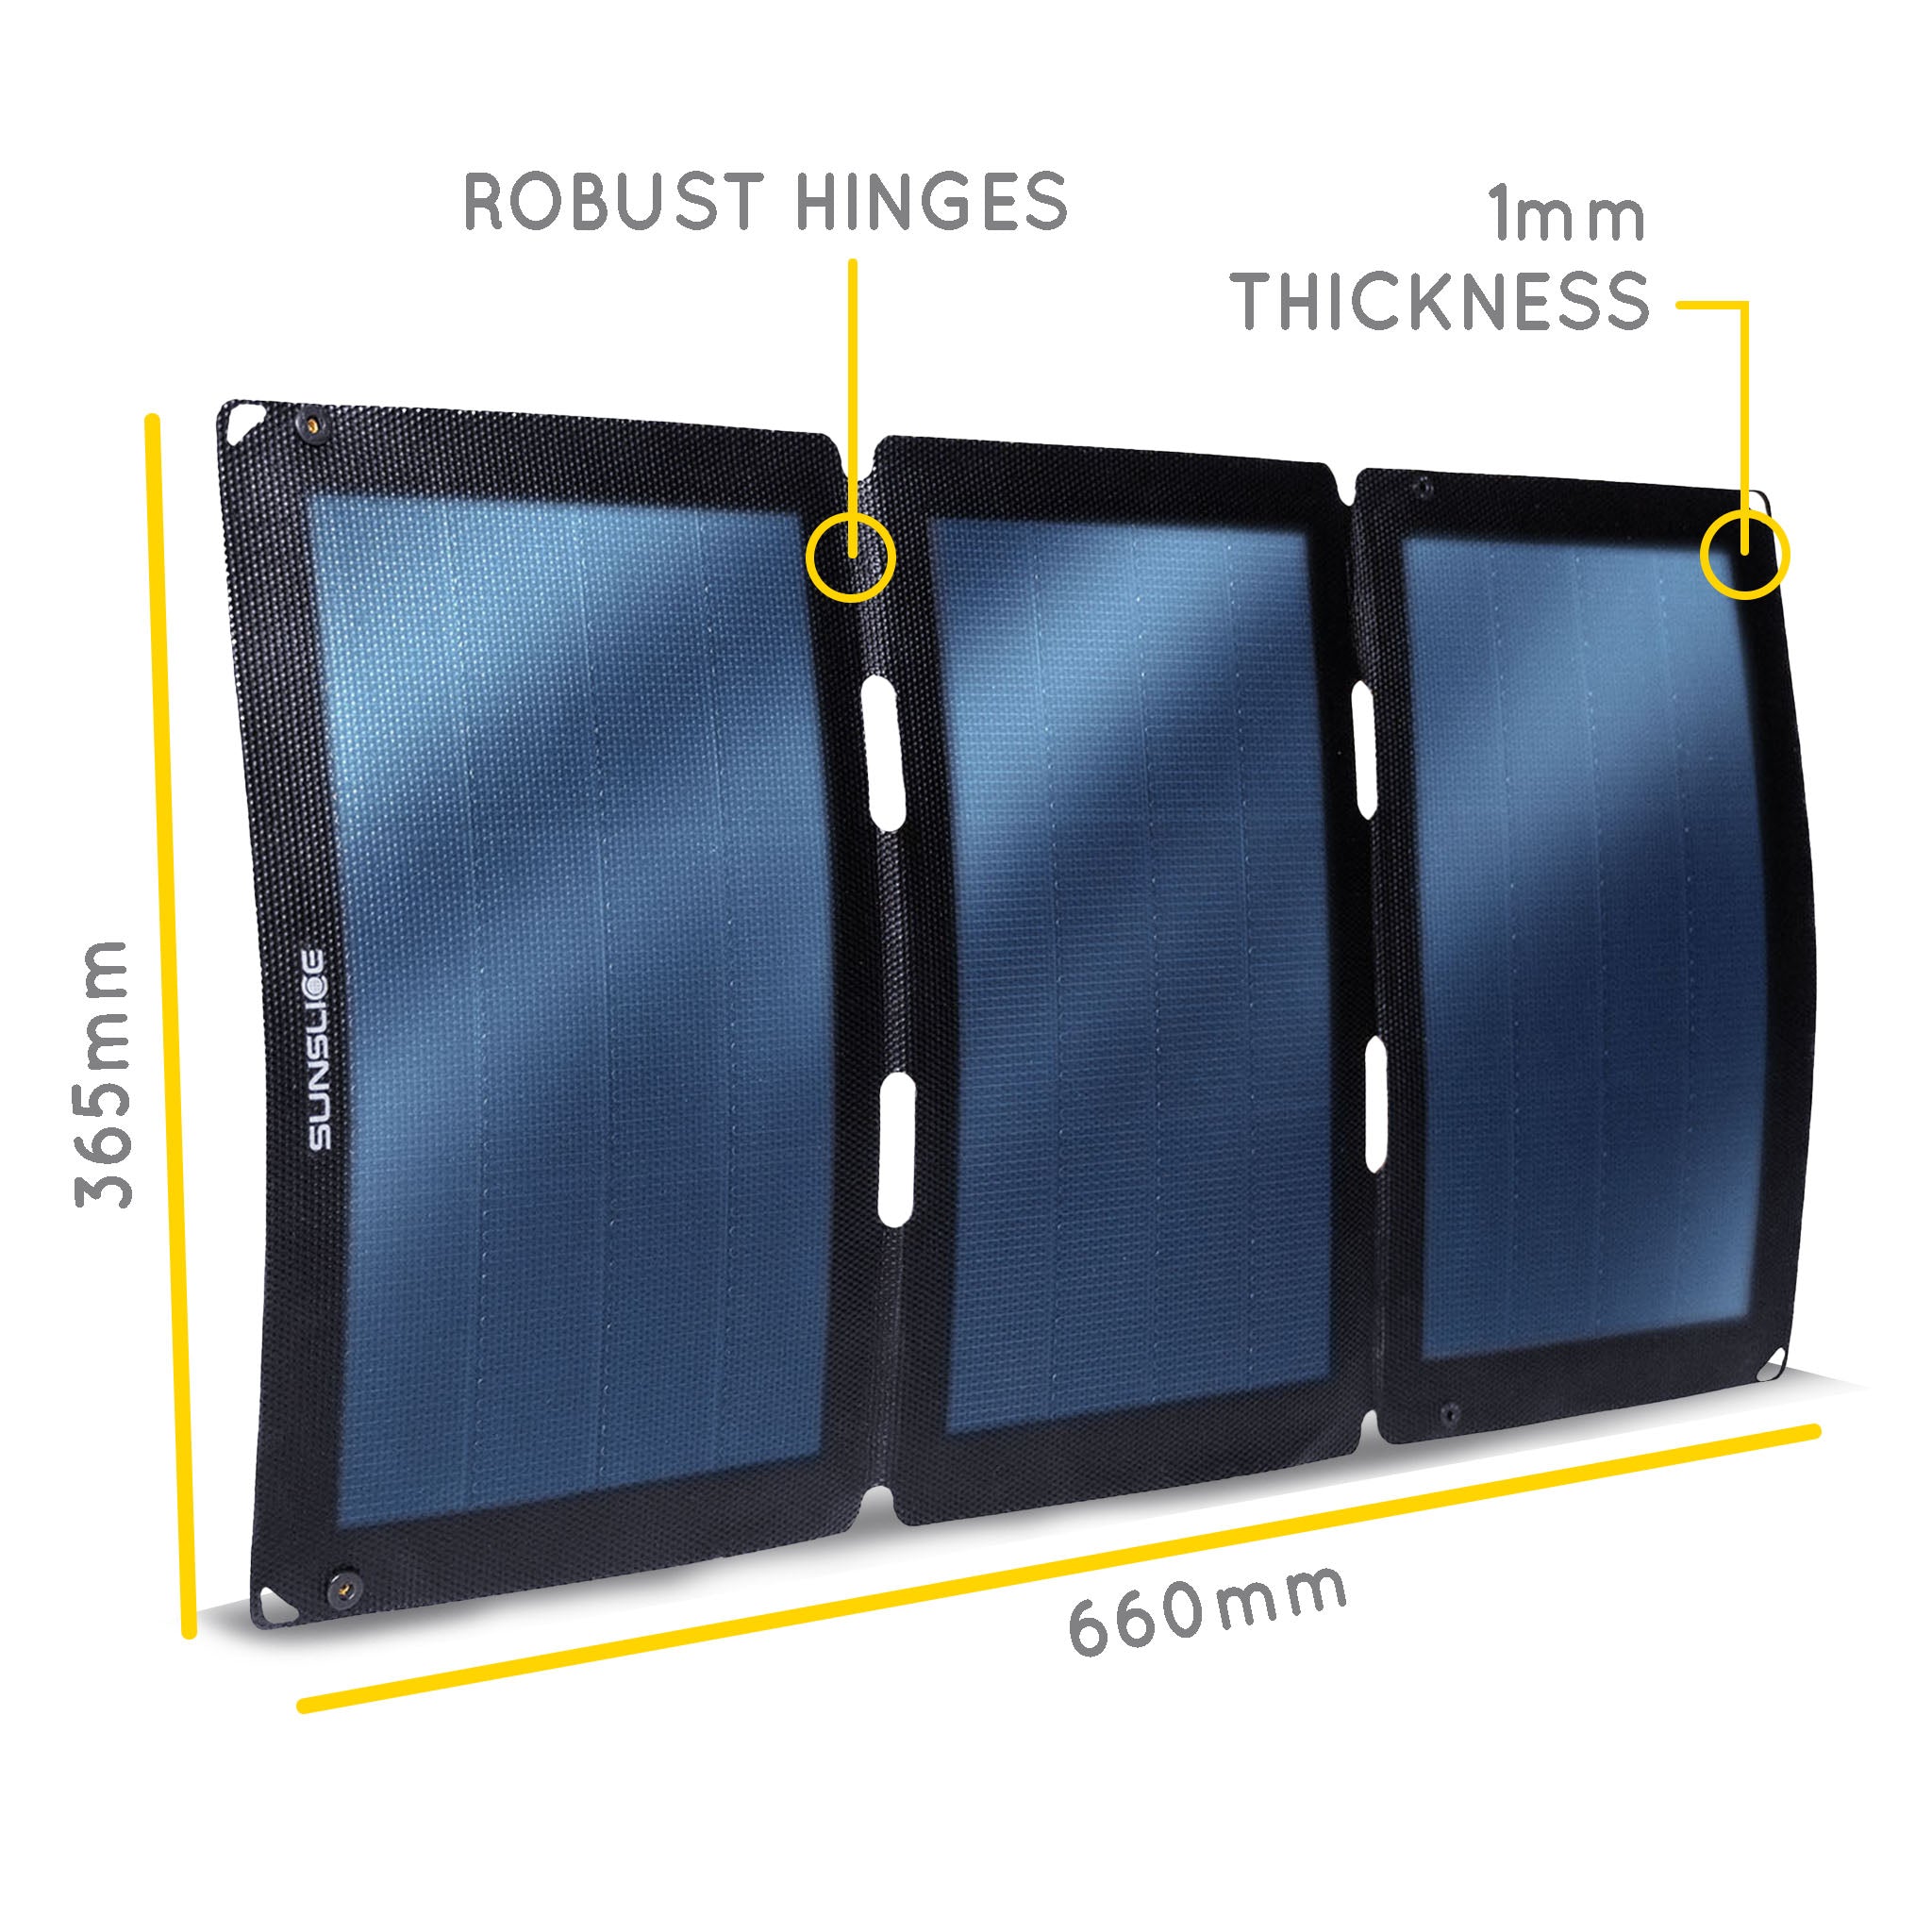 Solar panel  open ( 3 panels) informations . Size: 660 mm, 365 mm, Thickness 1 mm. Robust hinges 